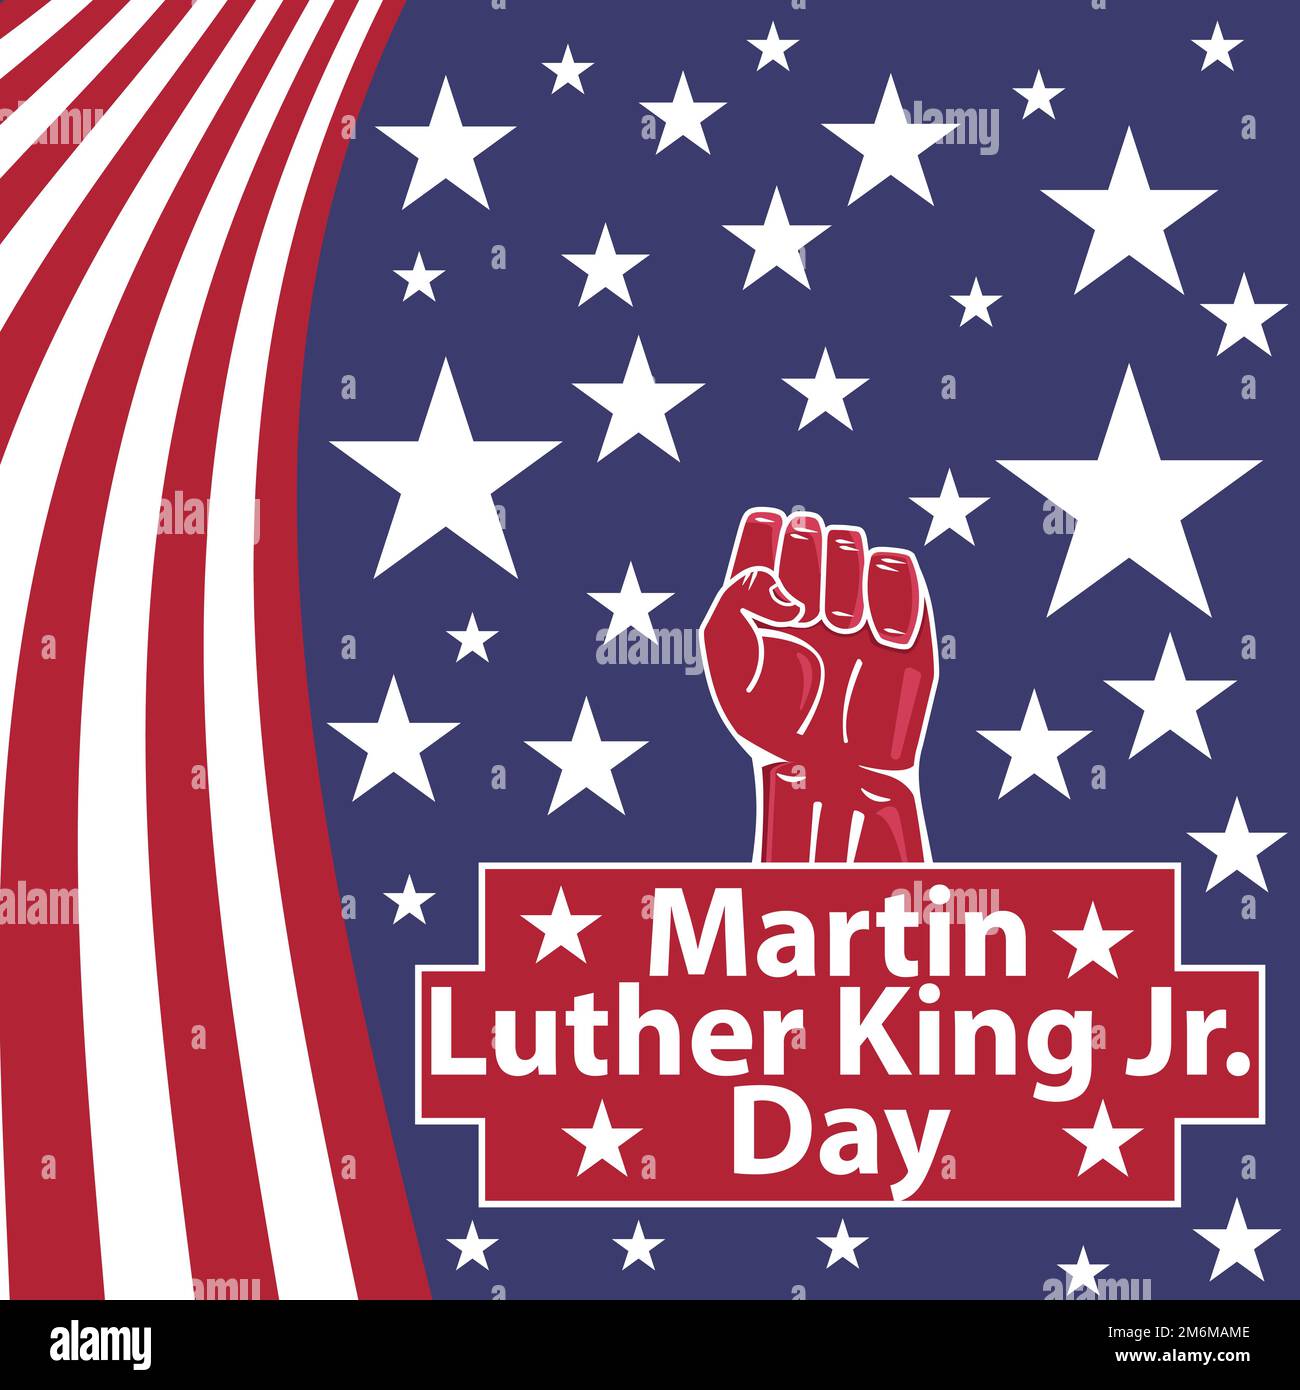 Vector banner design celebrating Martin Luther King Jr day in January every year . Banner designs consist of American flag theme styles. Stock Vector